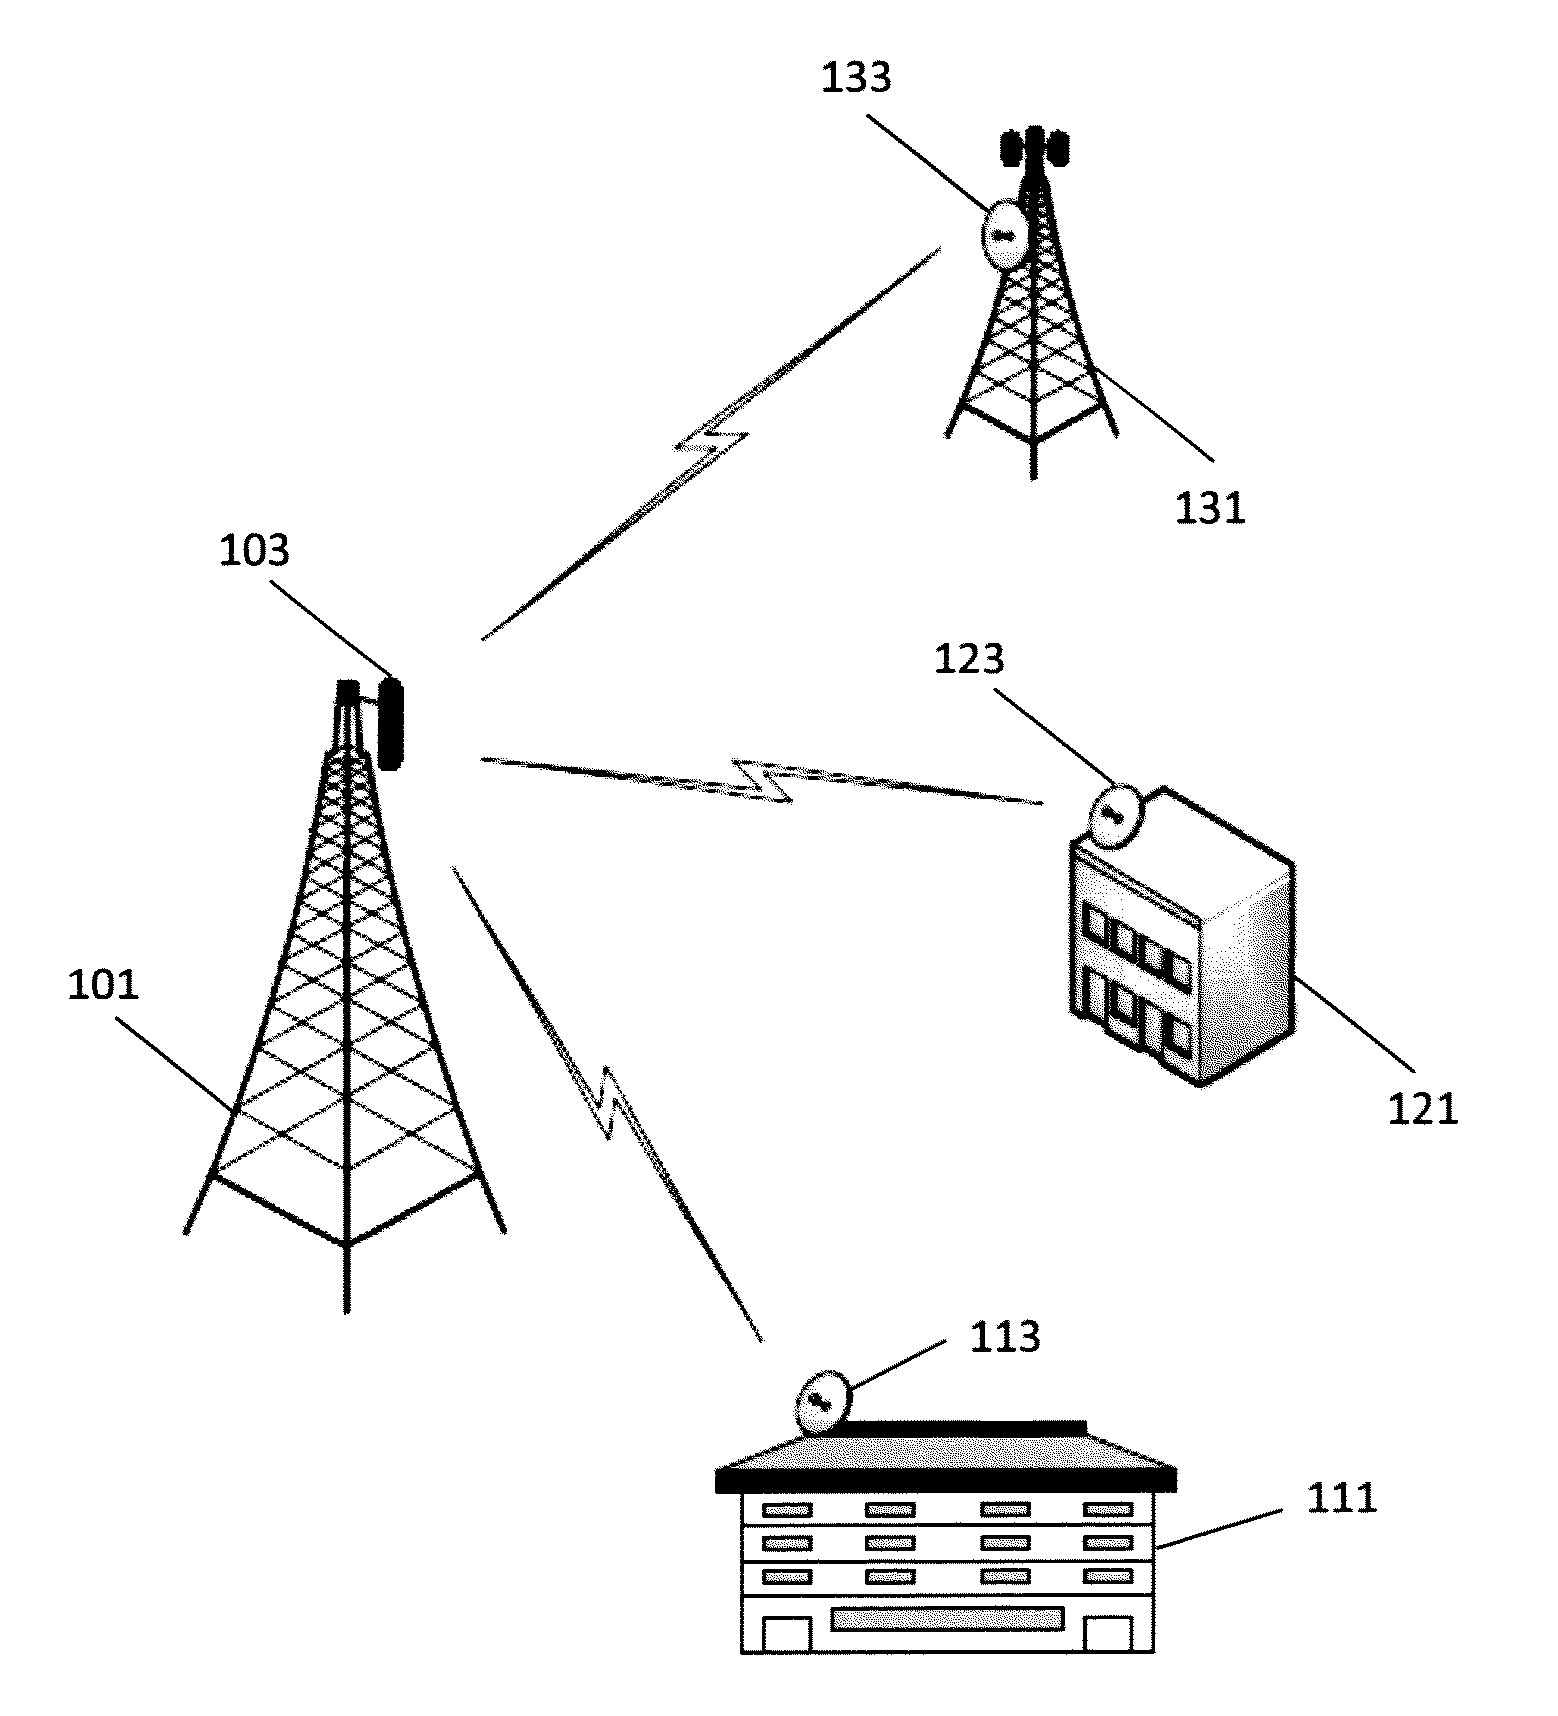 Point-to-multipoint microwave communication